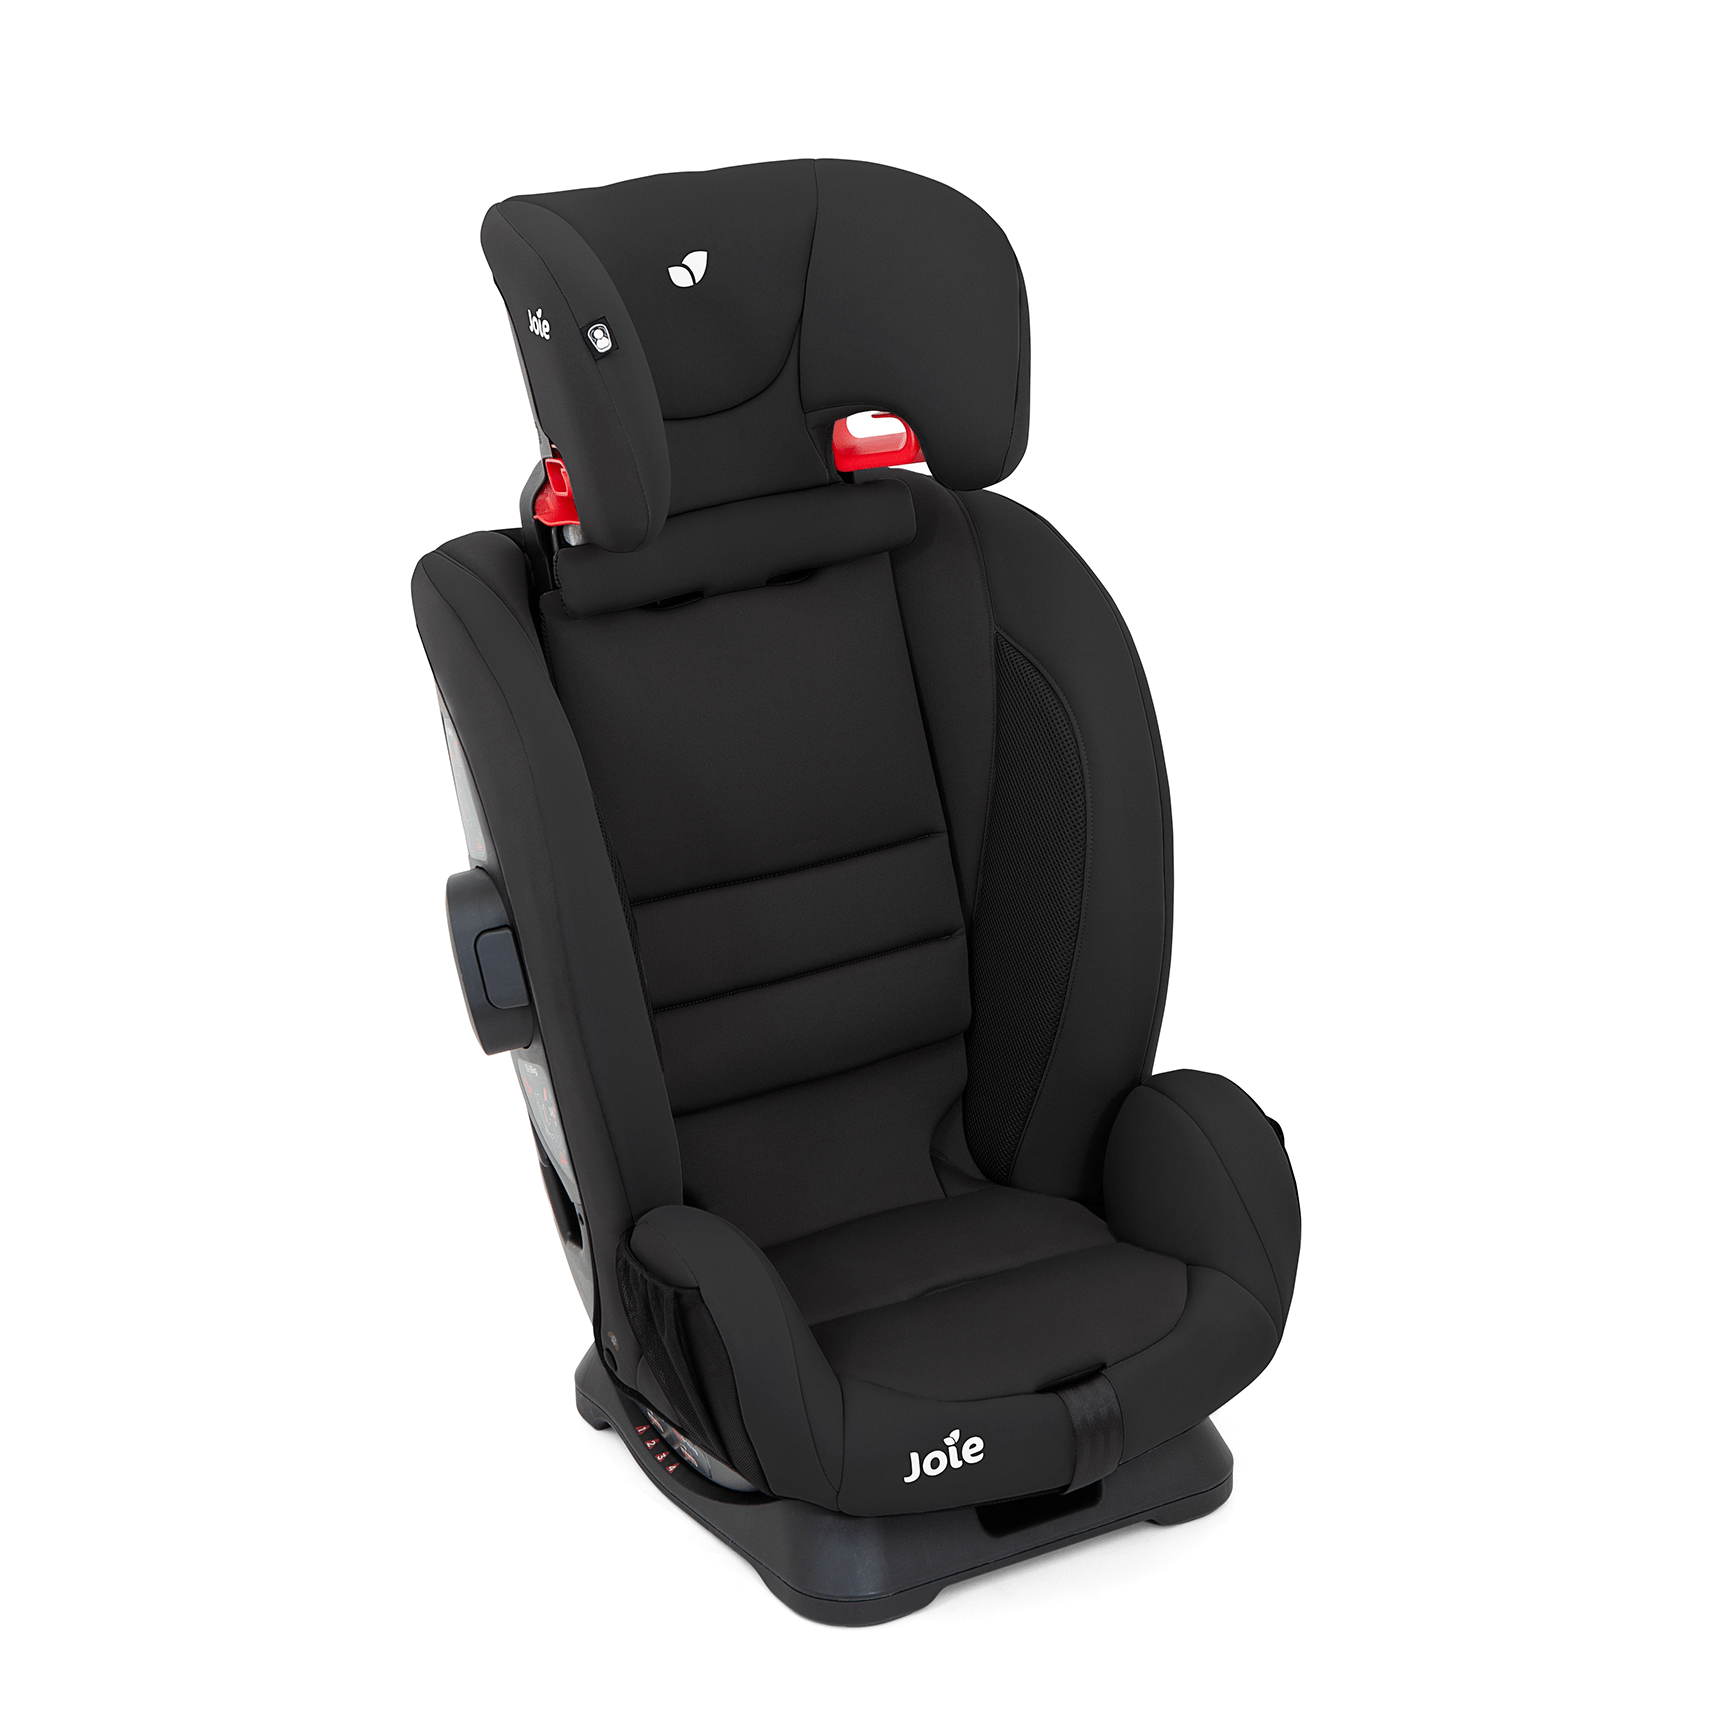 Joie Elevate R129 1/2/3 Car Seat in Thunder